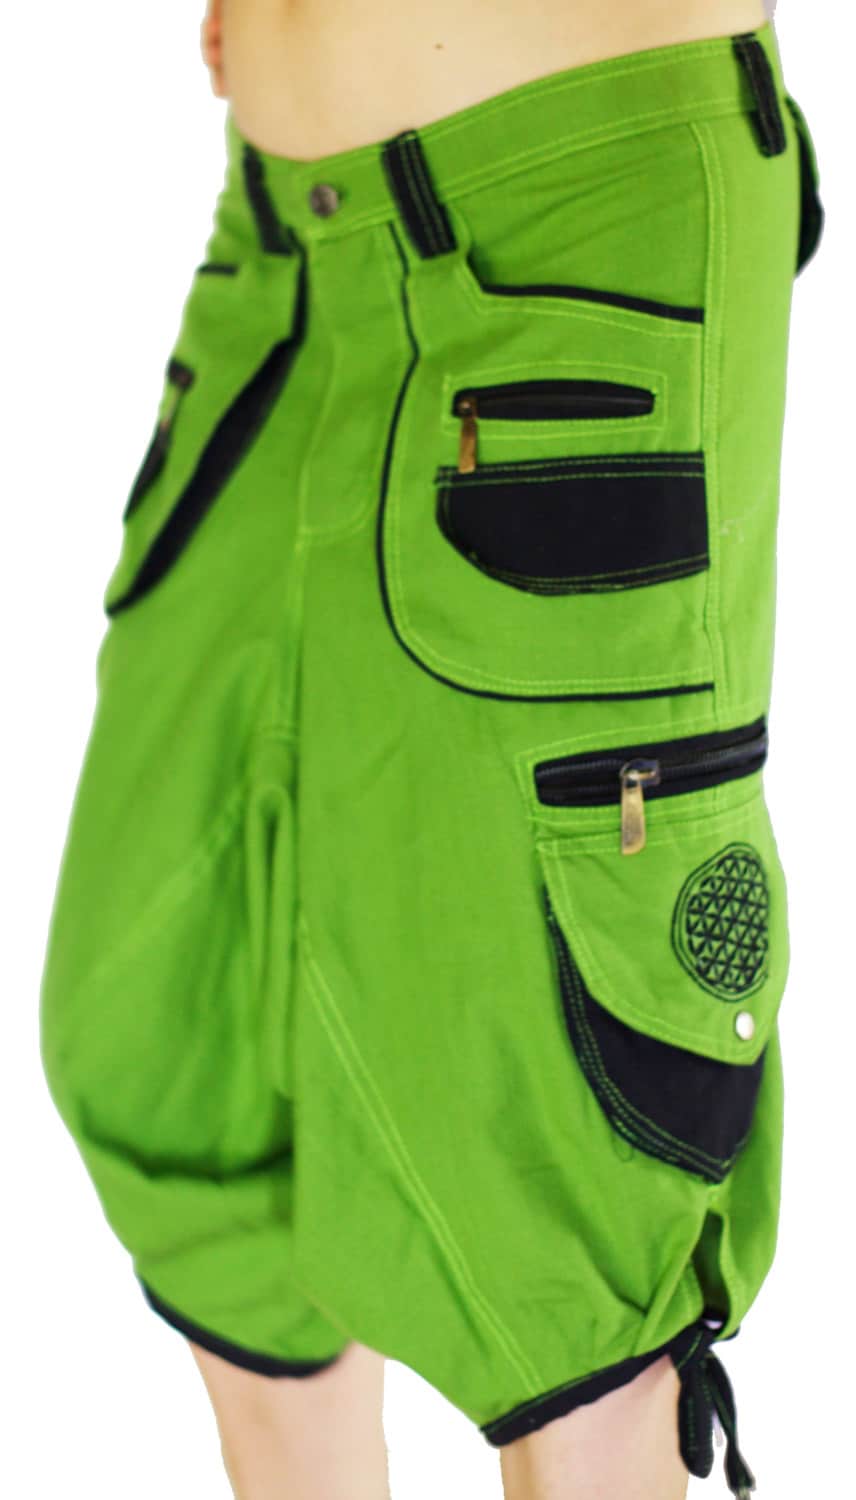 Hippie Pants wide clamdiggers many pockets made after order everything fully customizable